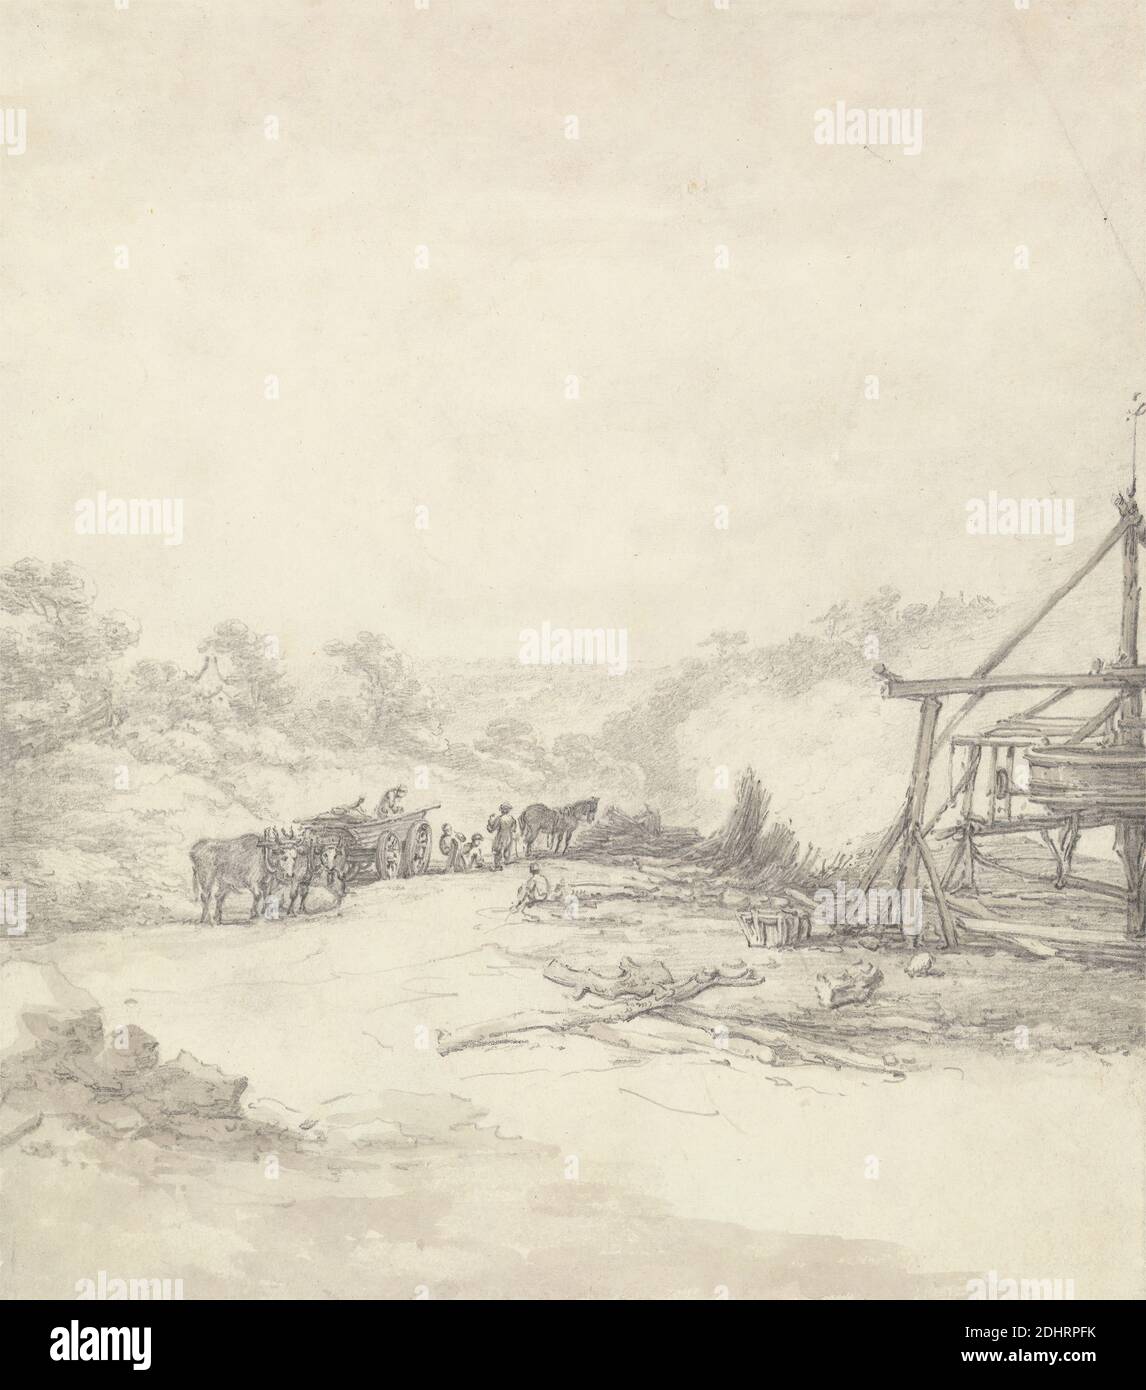 Unloading Pit Props at Coalbrookdale, Thomas Hearne, 1744–1817, British, after 1790, Graphite and gray wash on medium, slightly textured, cream wove paper, Sheet: 8 1/2 x 7 1/2 inches (21.6 x 19.1 cm), carts, coal, coal mine, coal pits, genre subject, horses (animals), labor, loading, logs, men, mine, pit props (coal mining), props, resting, smoke, trees, unloading, wagons, working, Coalbrookdale, England, Europe, Shropshire, United Kingdom Stock Photo